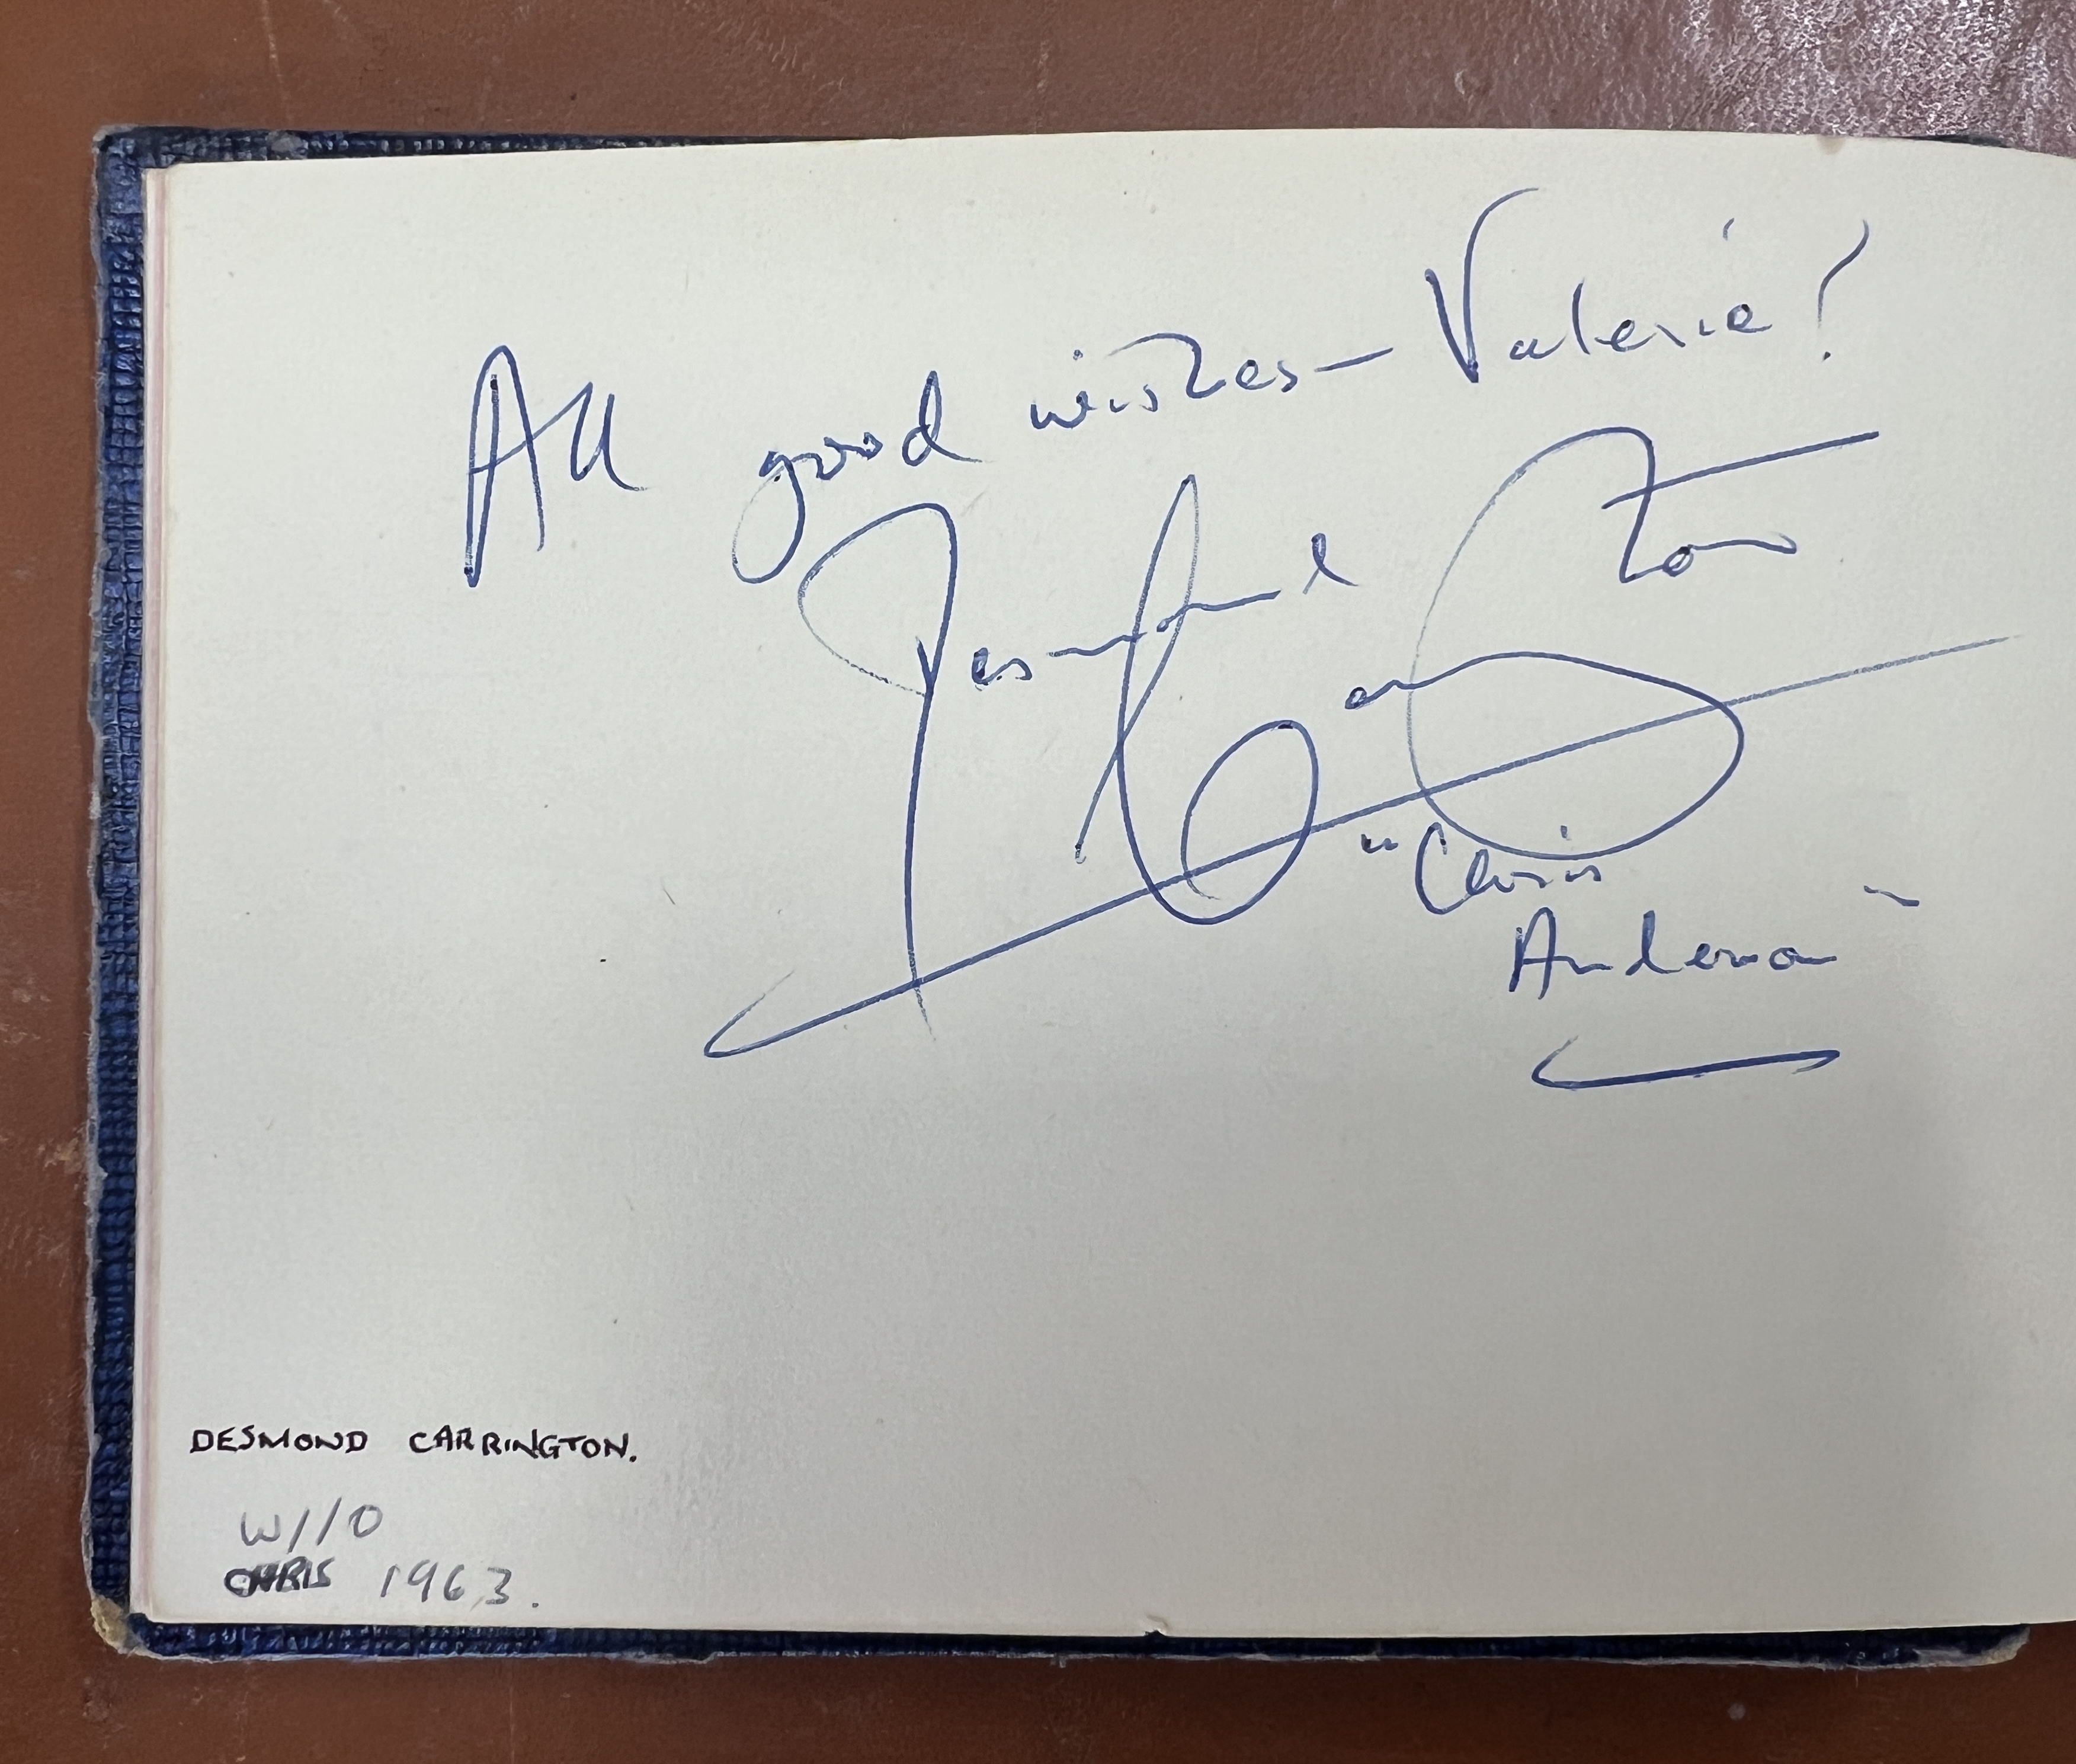 A 1960's autograph album containing autographs of various celebrities including Cliff Richard, - Image 12 of 37